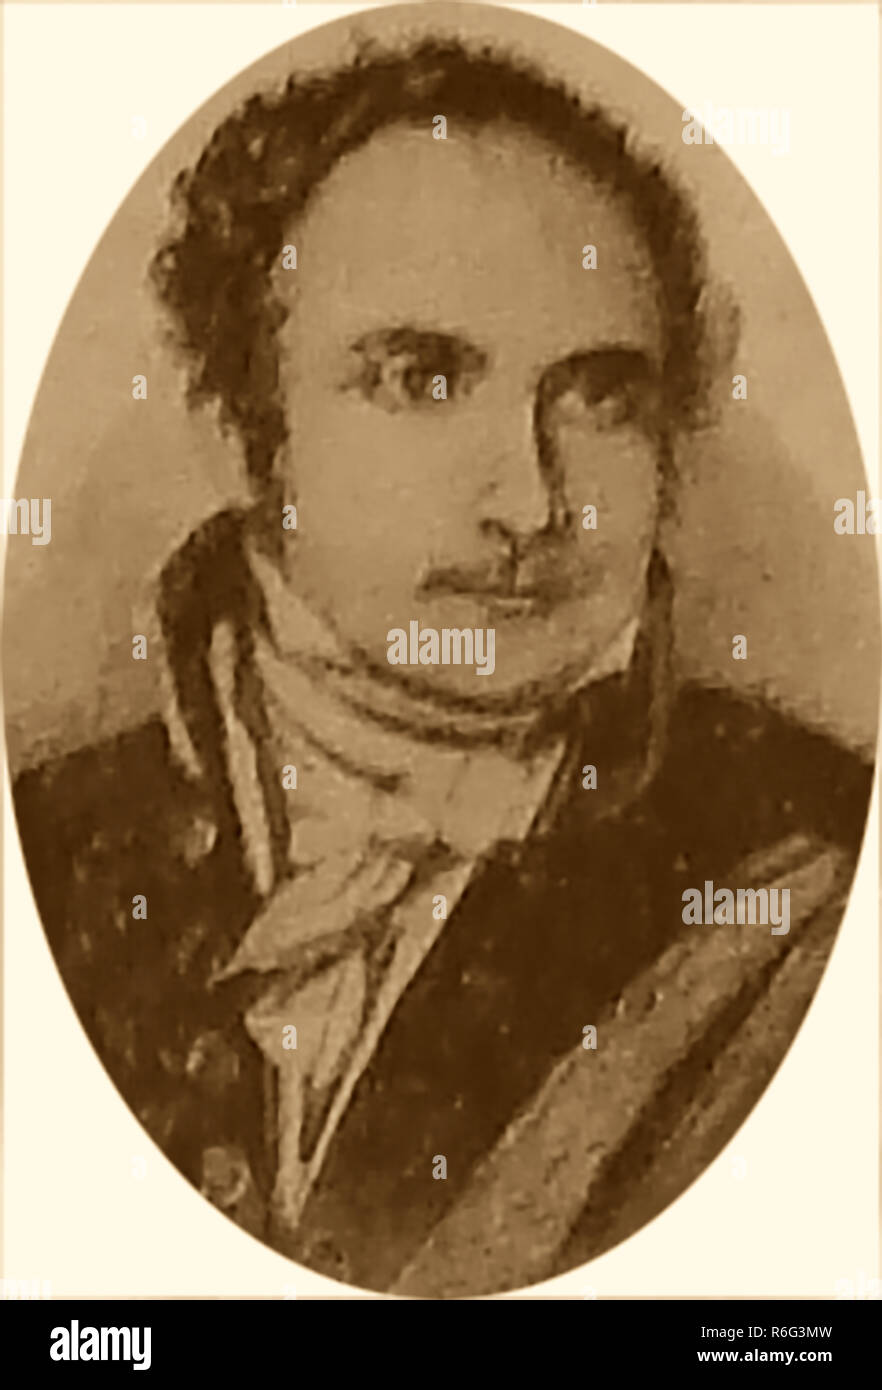 FRENCH REVOLUTIONARY FIGURES - July Revolution of 1830 -(2nd French Revolution) - Portrait of financier Casimir Pierre Perier - Liberal-conservative Resistance Party leader, President of the Council of Ministers and Minister of Interior Stock Photo